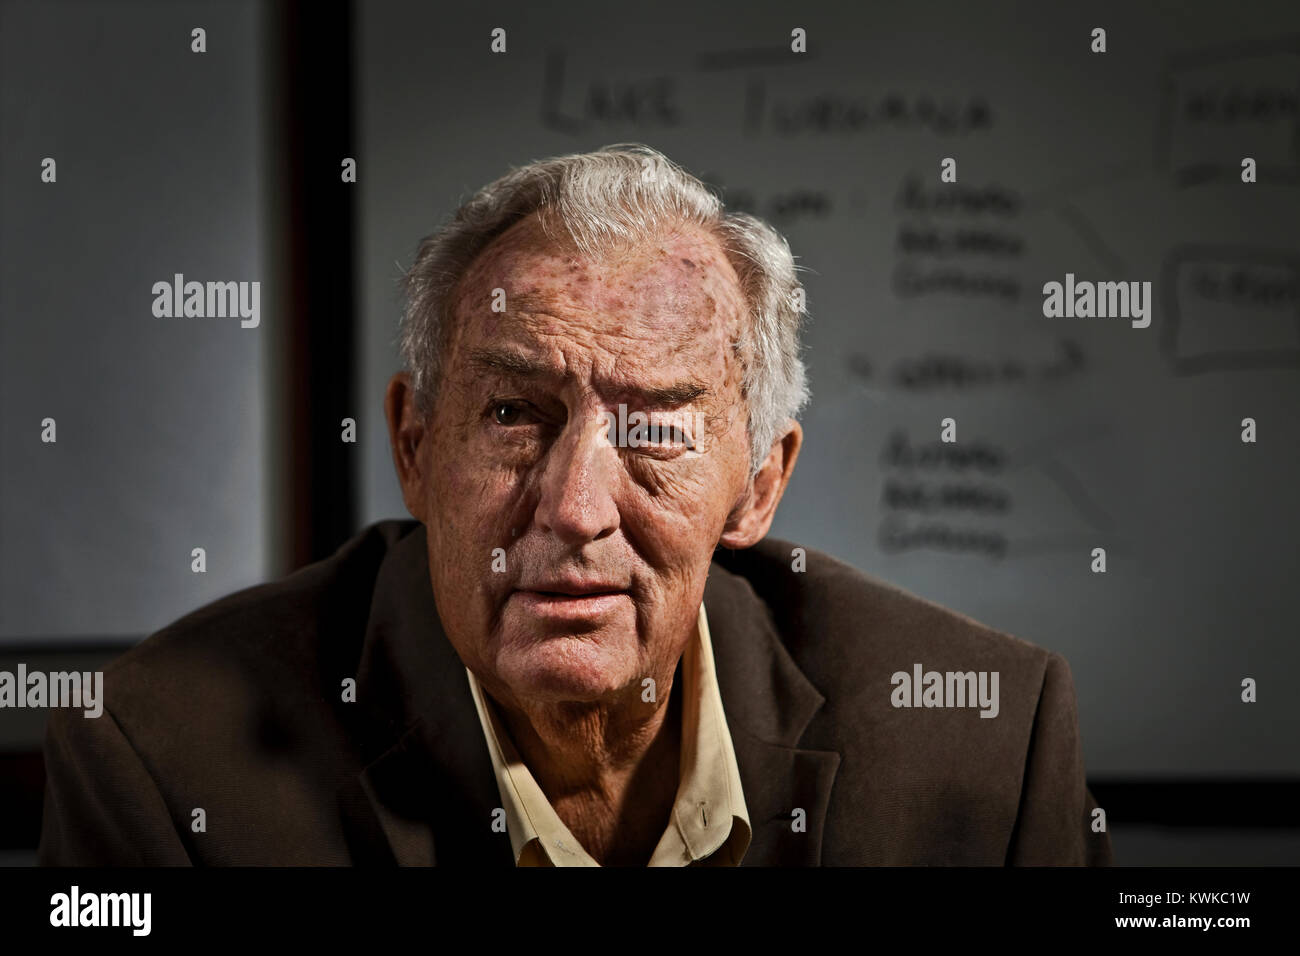 Richard Leakey, paleoanthropologist, conservationist, and professor of anthropology at Stony Brook, where he is Chair of the Turkana Basin Institute. Stock Photo